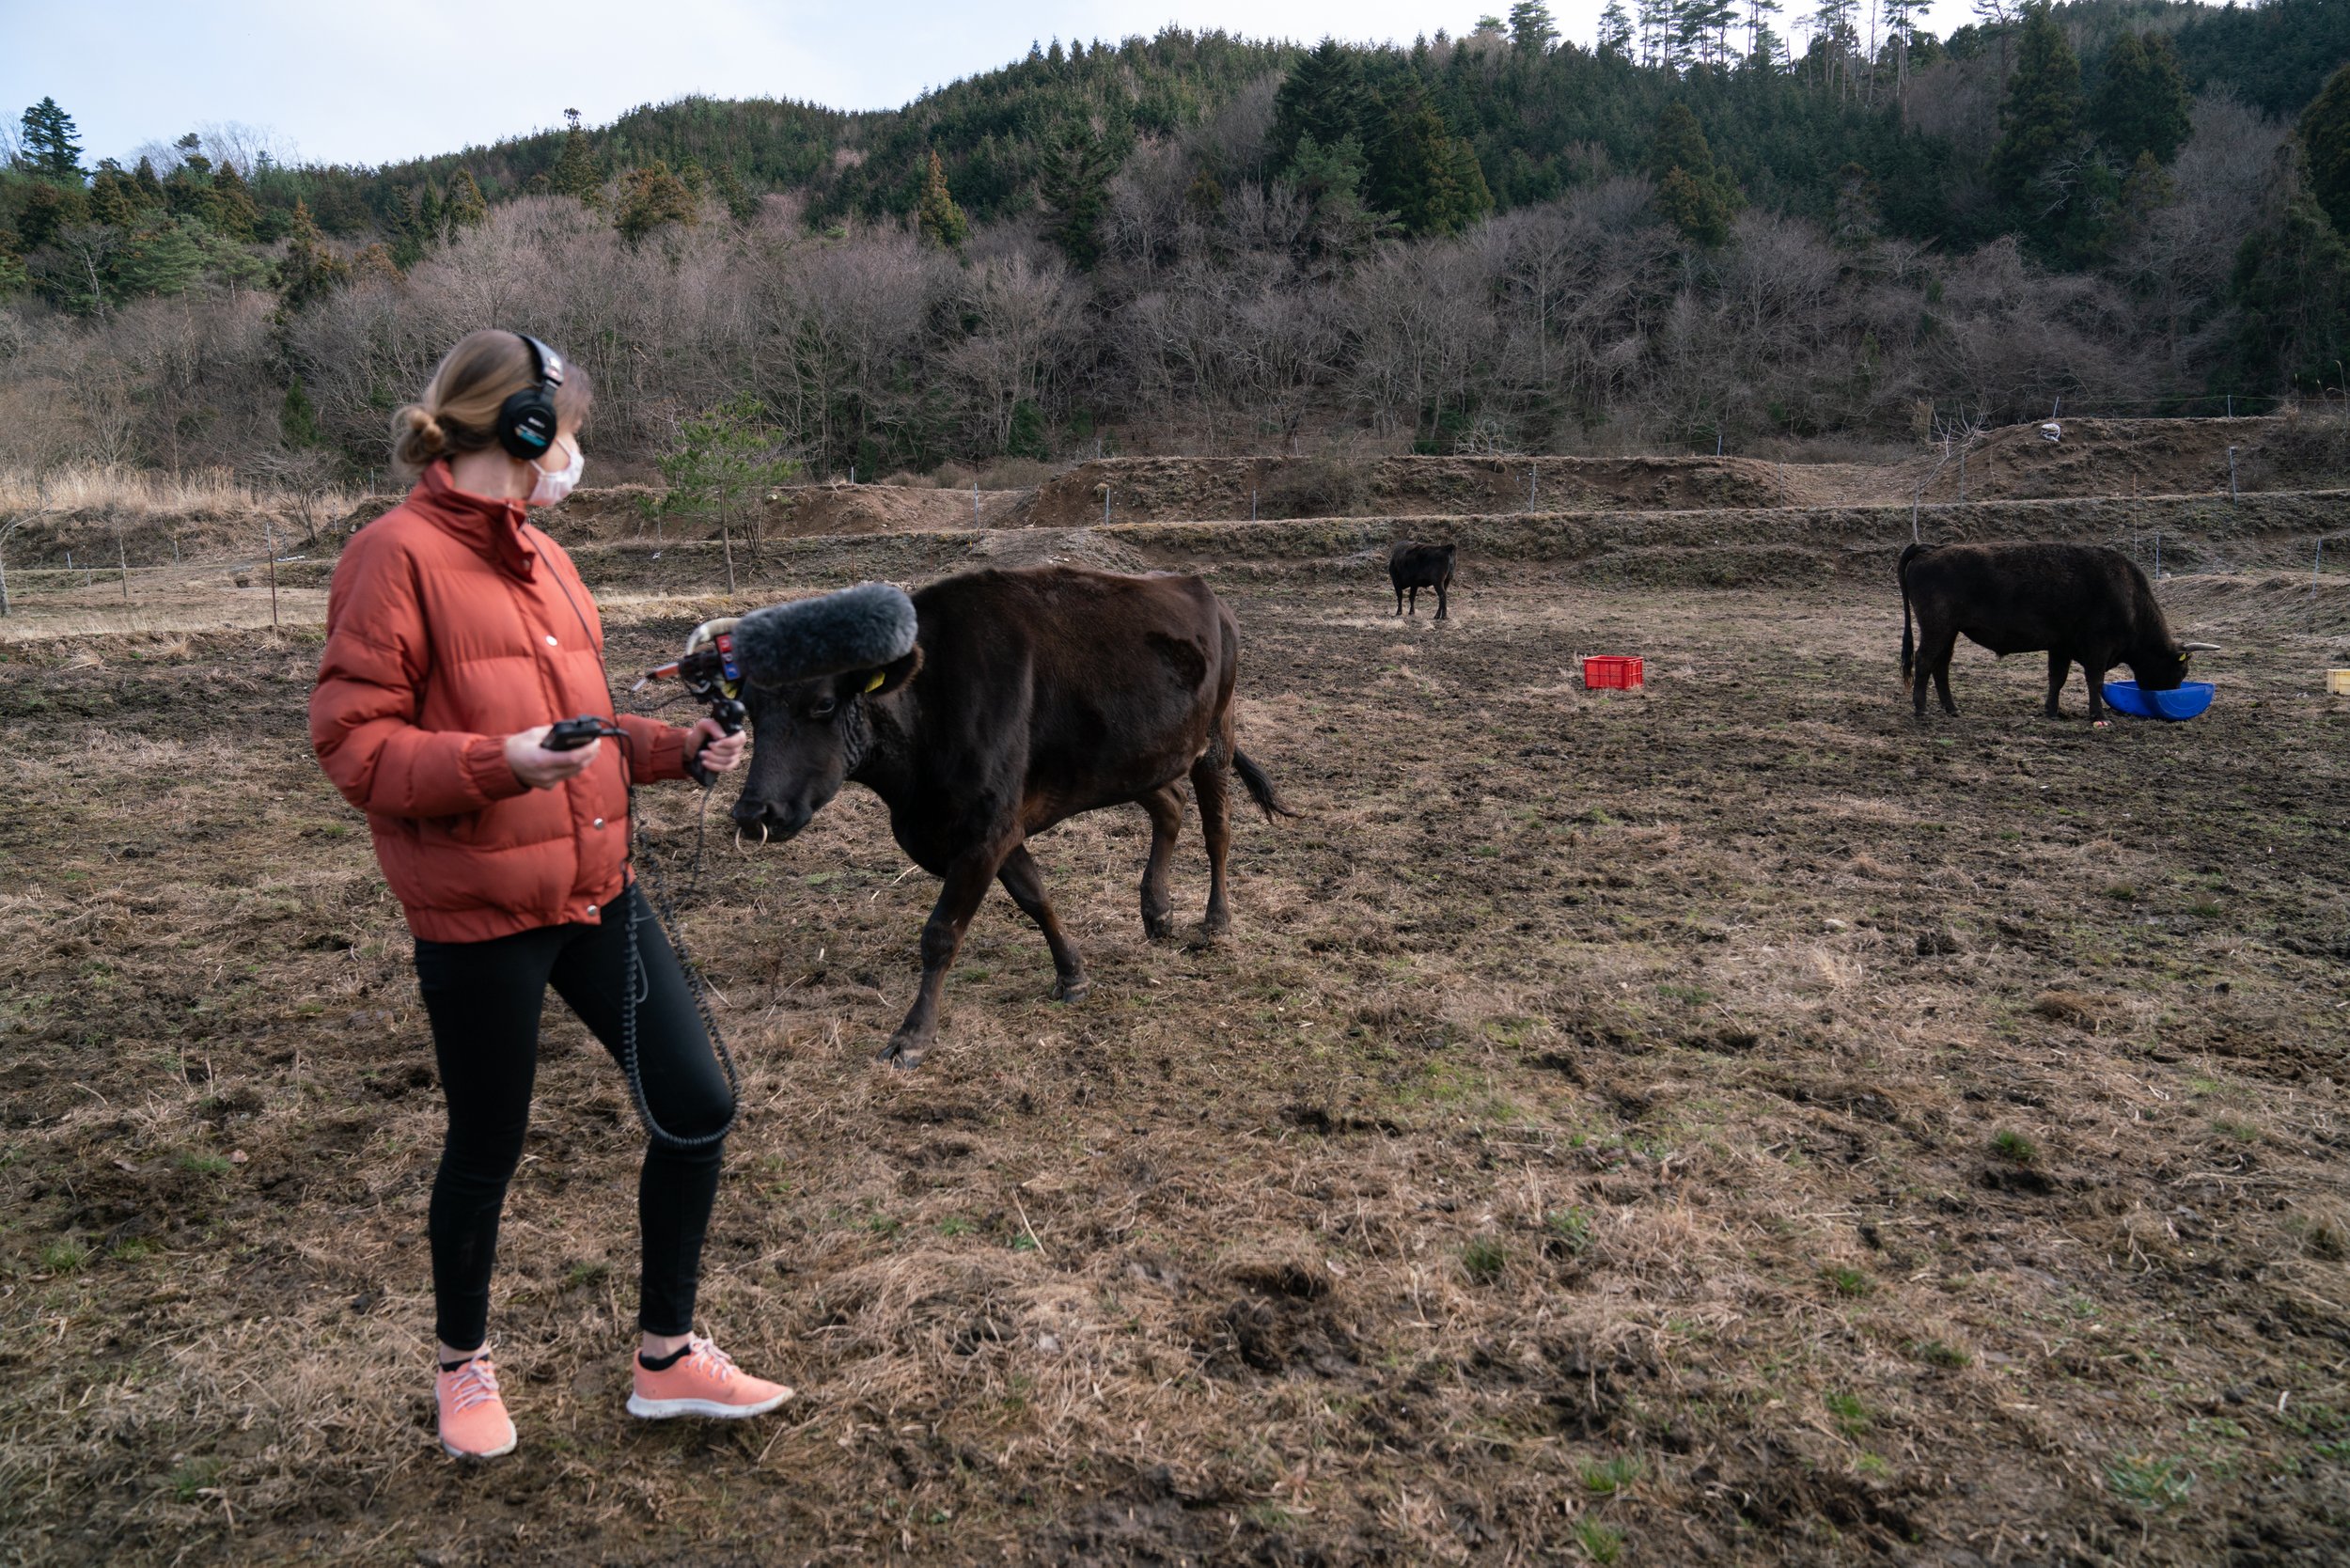  Kat records sound from cows on Satsuki Tani’s farm in the exclusion zone in Fukushima. Many of these cows were released and near death after the disaster on 3/11. Tani has made it her mission to rehabilitate them, using them to help manage and maint